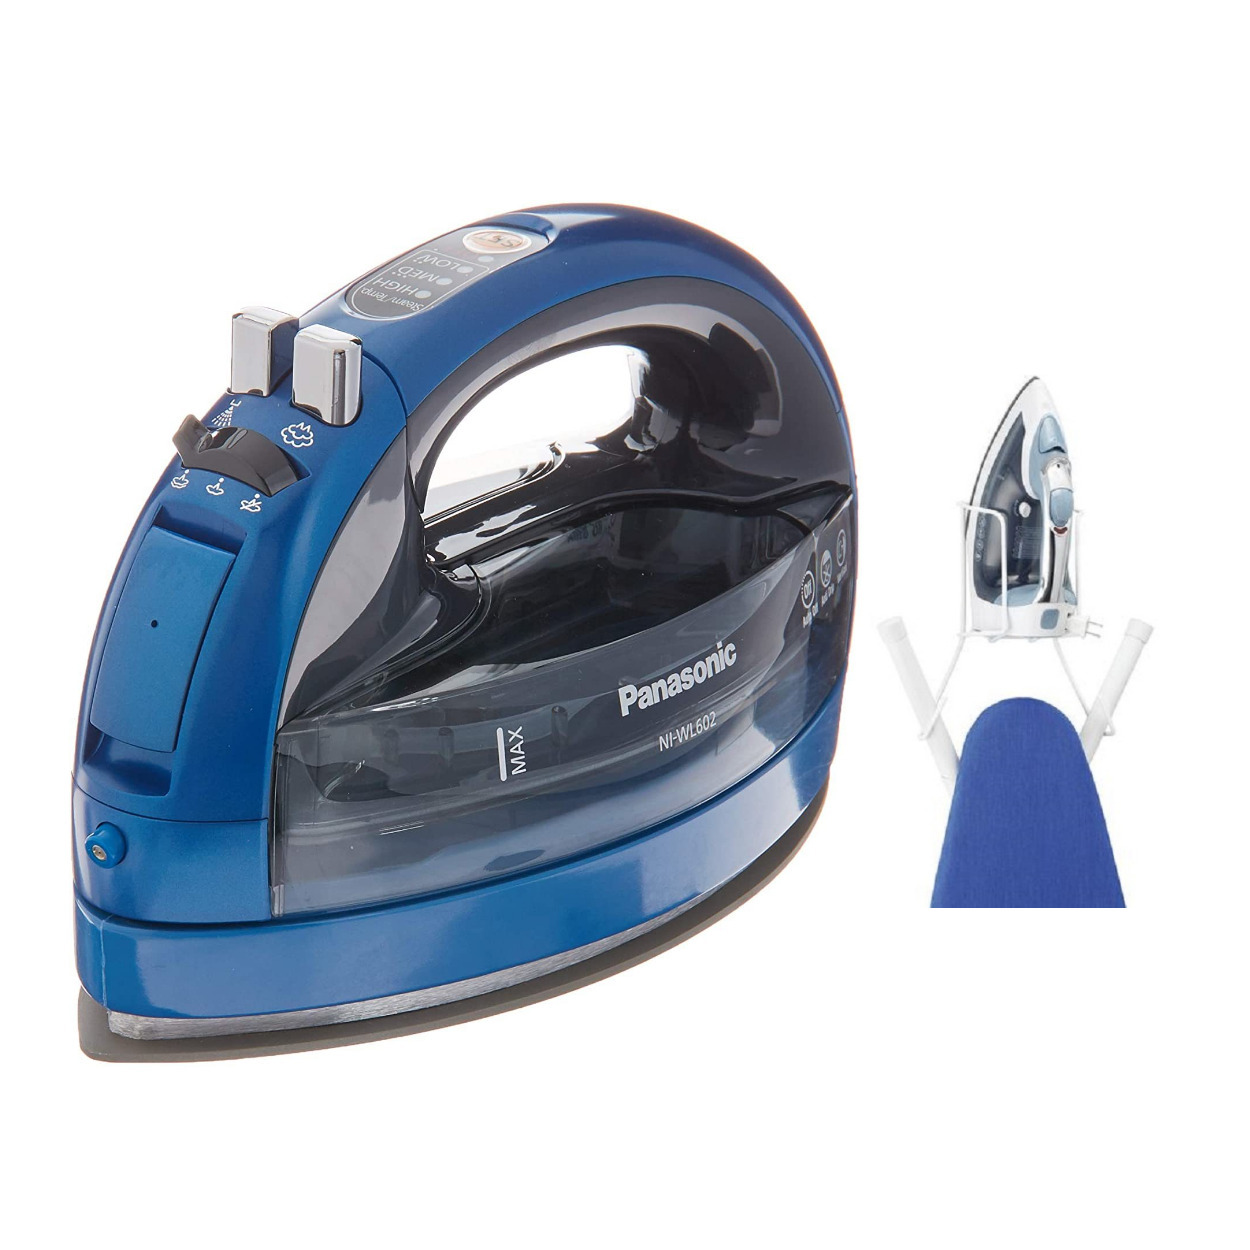 Panasonic Cordless 360-Degree Freestyle Steam/Dry Iron (Blue) with Ironing Caddy